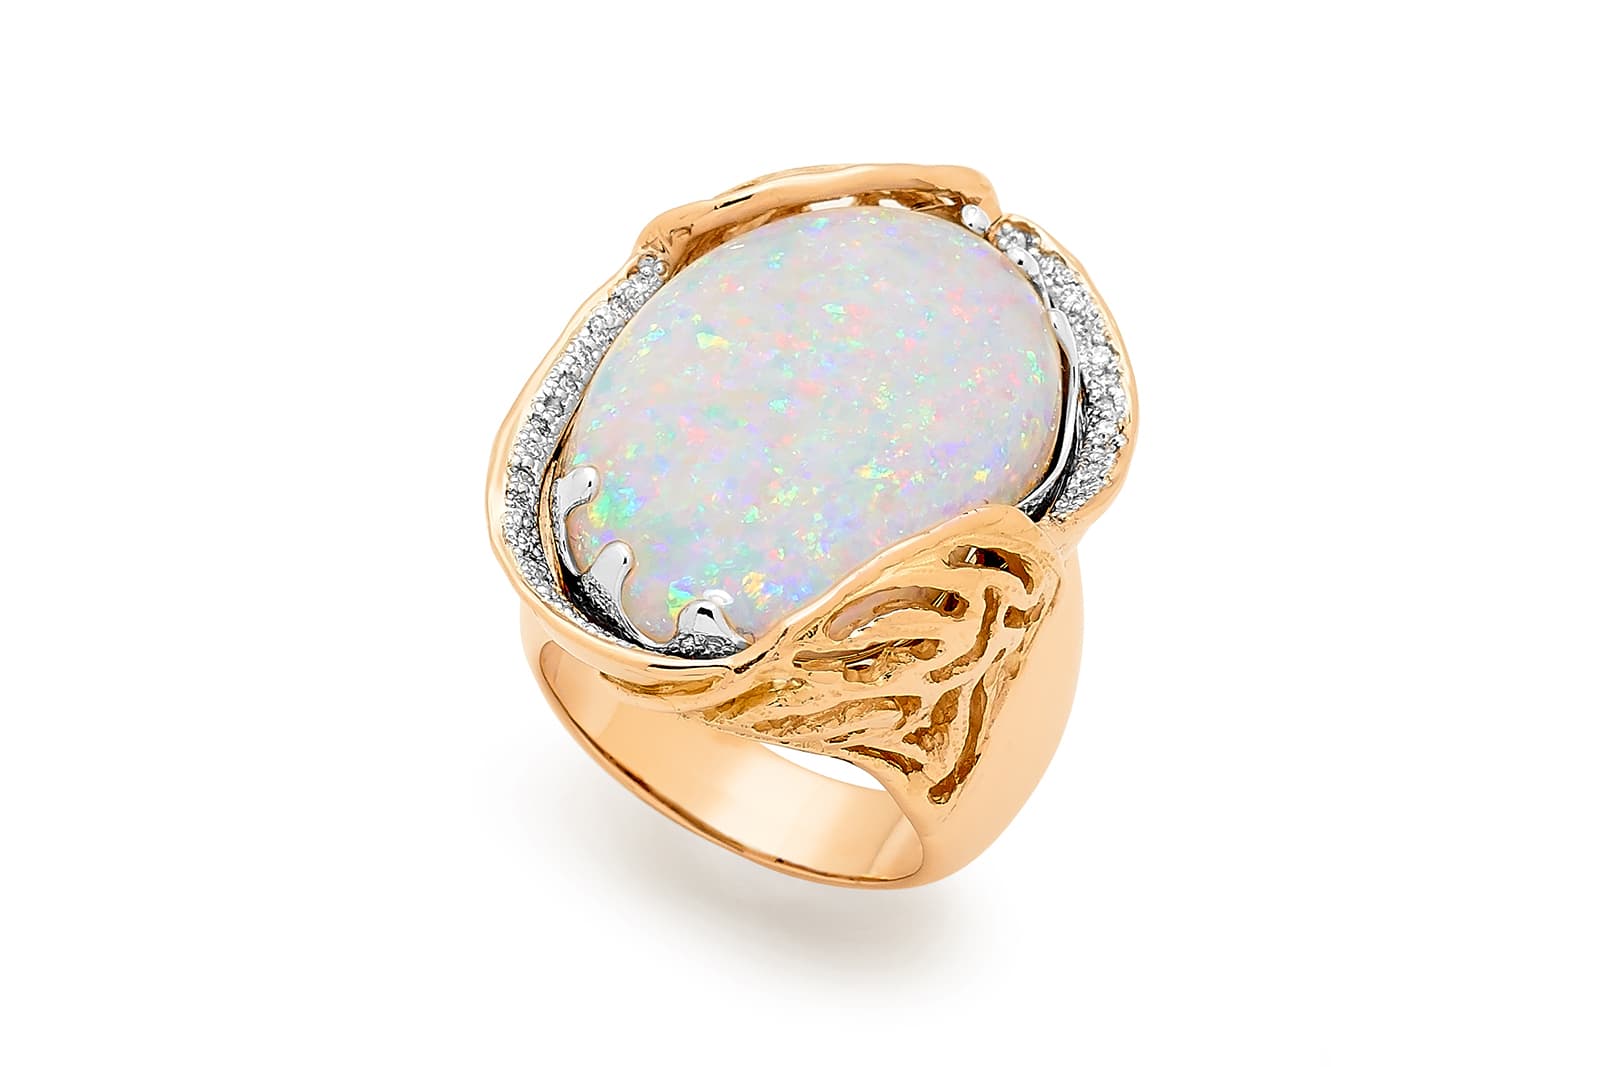 Sydney's Opal Minded is renowned for its Australian opals